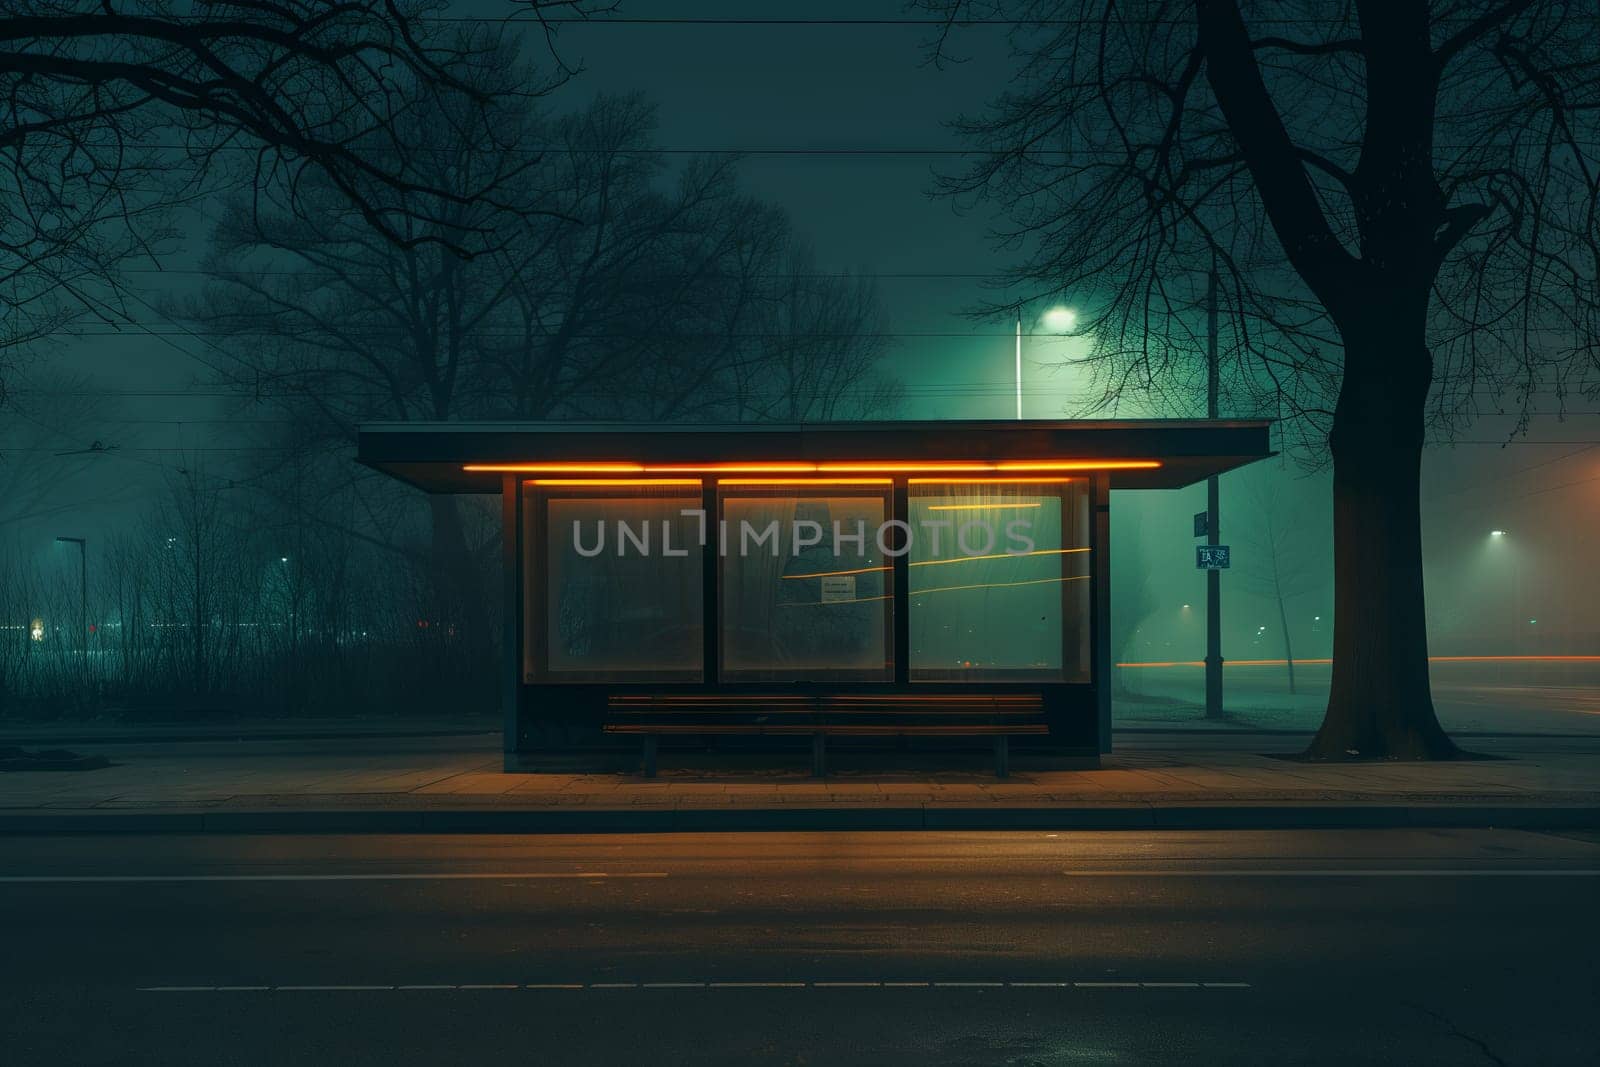 a bus stop in the middle of a foggy street at night by richwolf